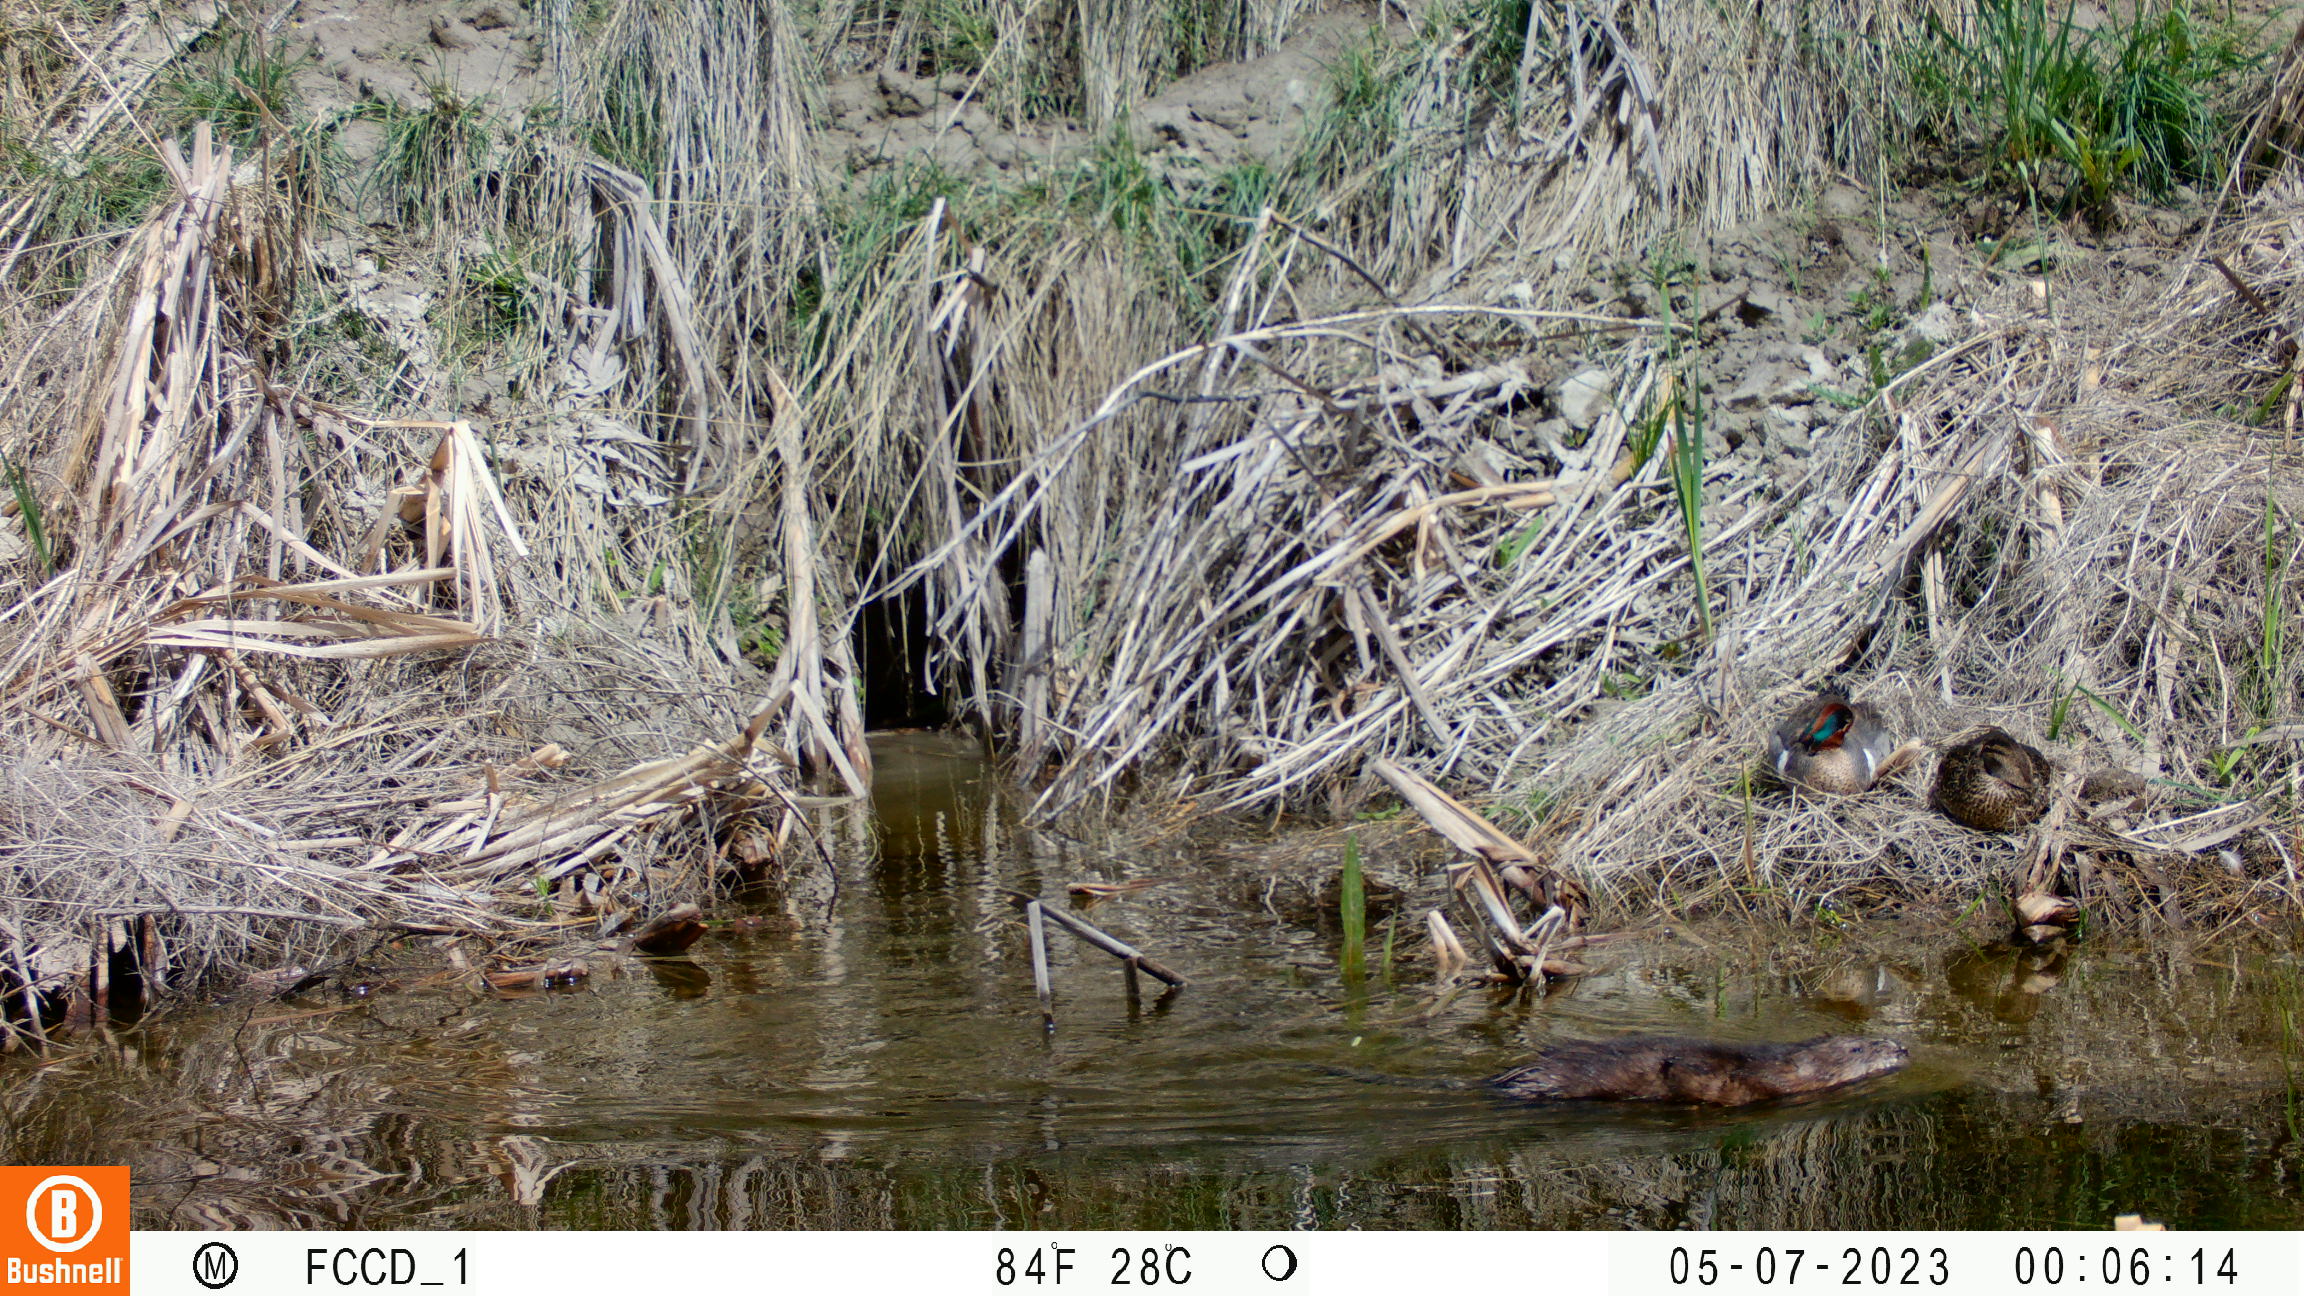 A brown muskrat swims through water. In the background, dried brown grasses line the creek bank, with a small hole forming the muskrat den.